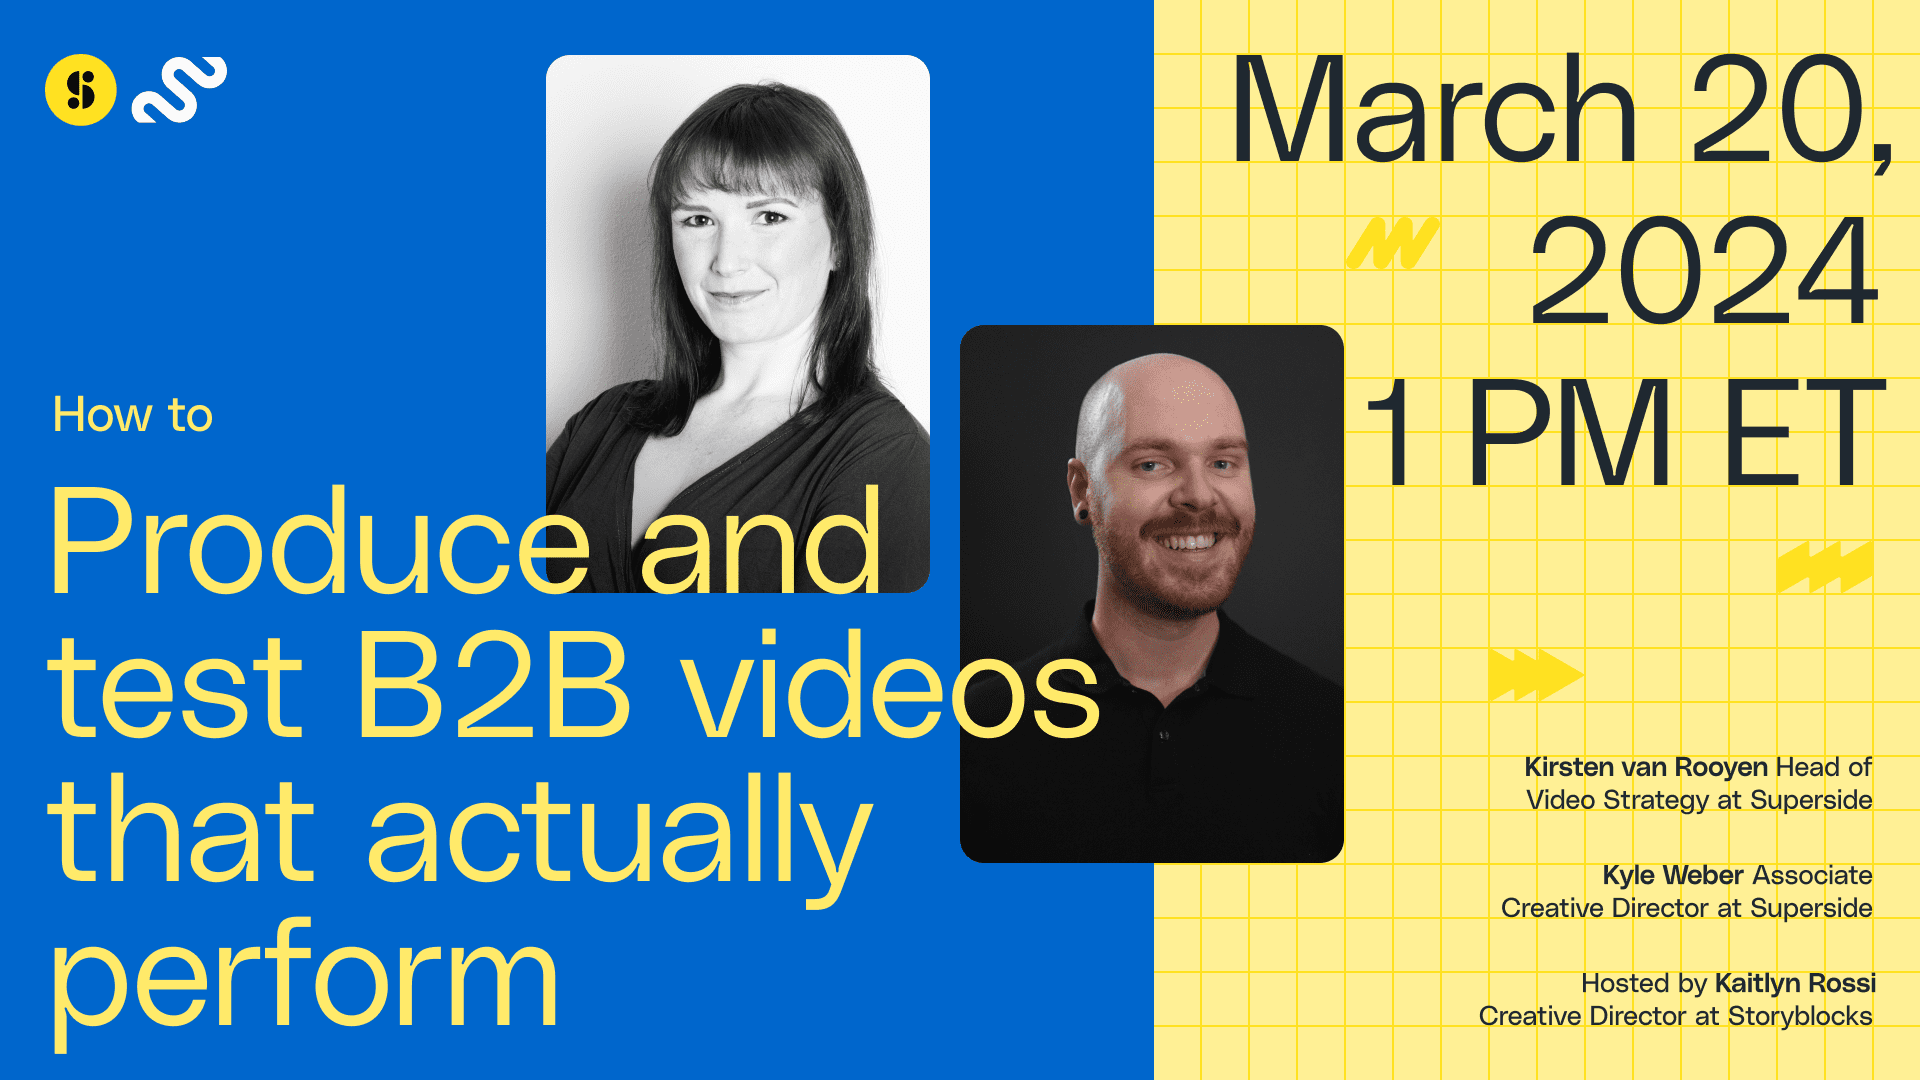 How to produce and test B2B videos that perform